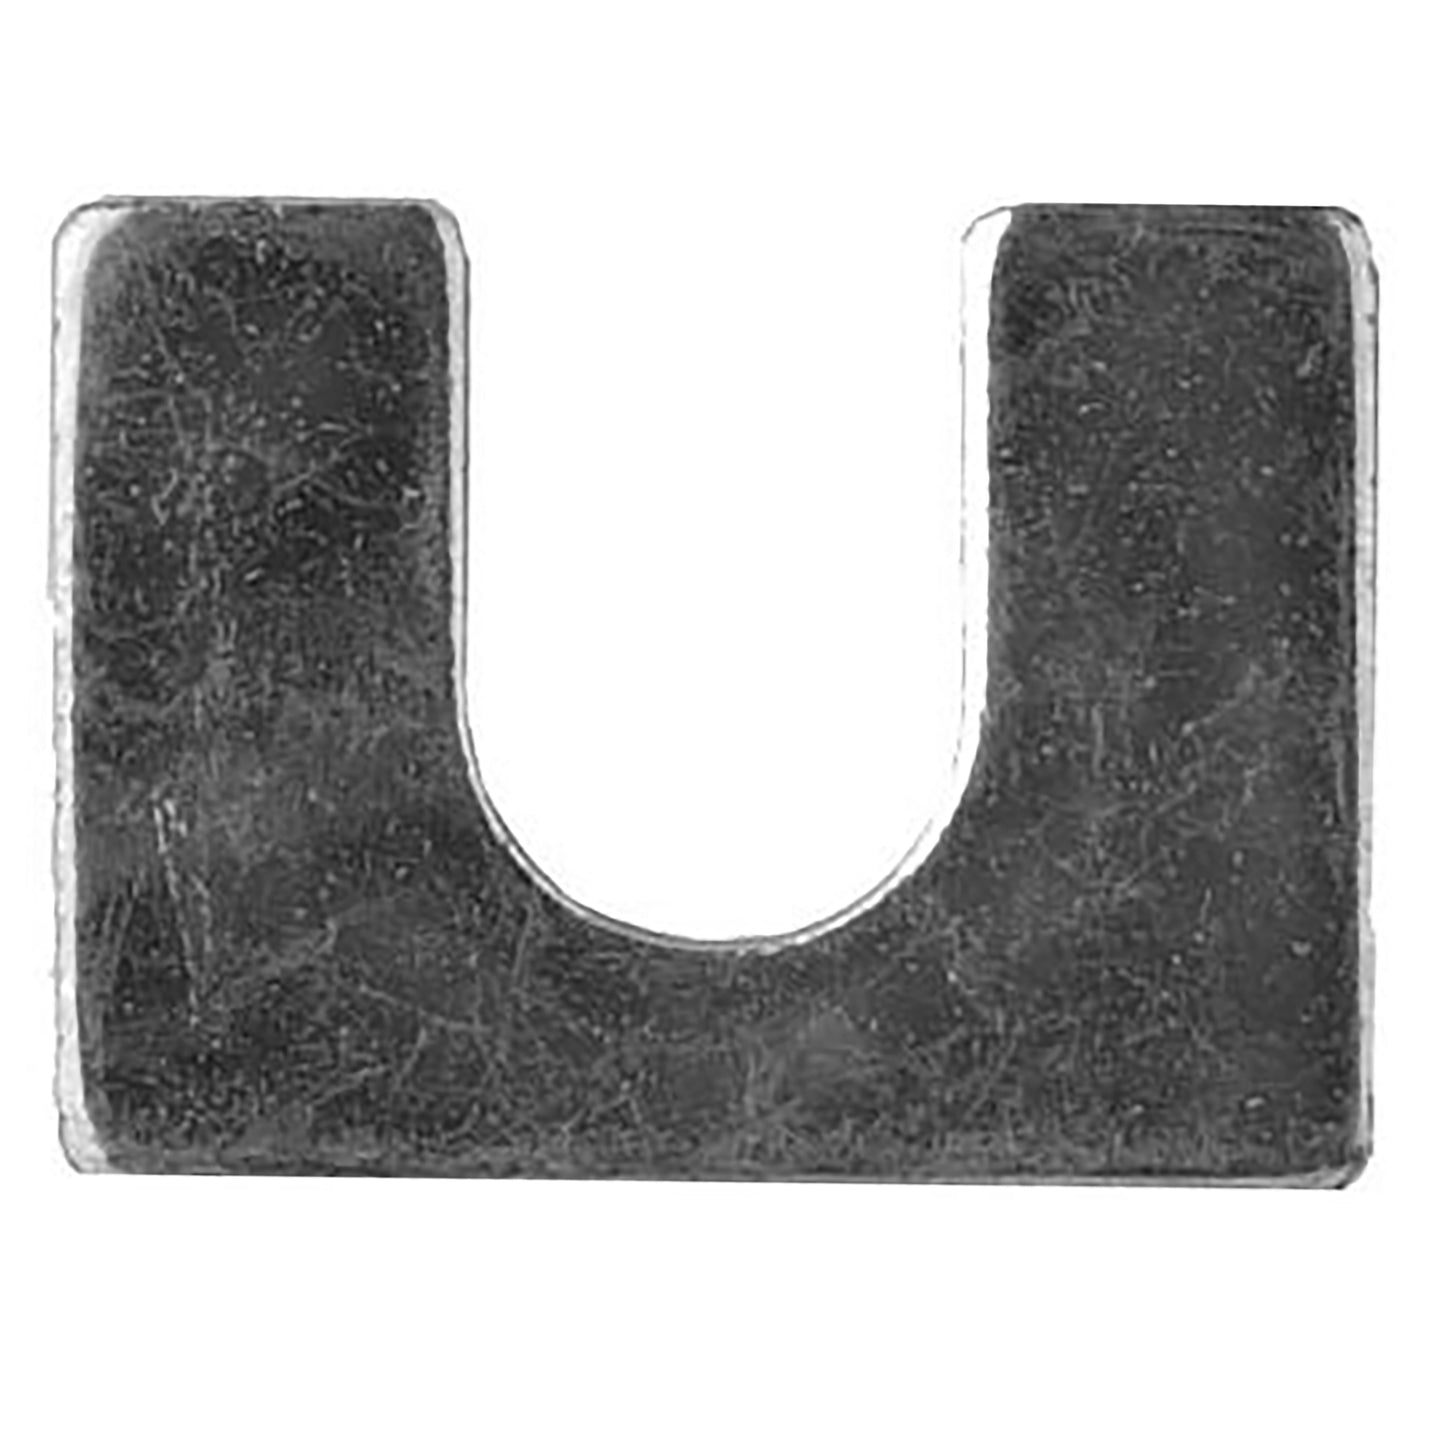 Zinc Plated Steel Body Shims - 1/8" Thick - 3/4" Slot - 2" x 1-1/2" O.D. - 50 Pack